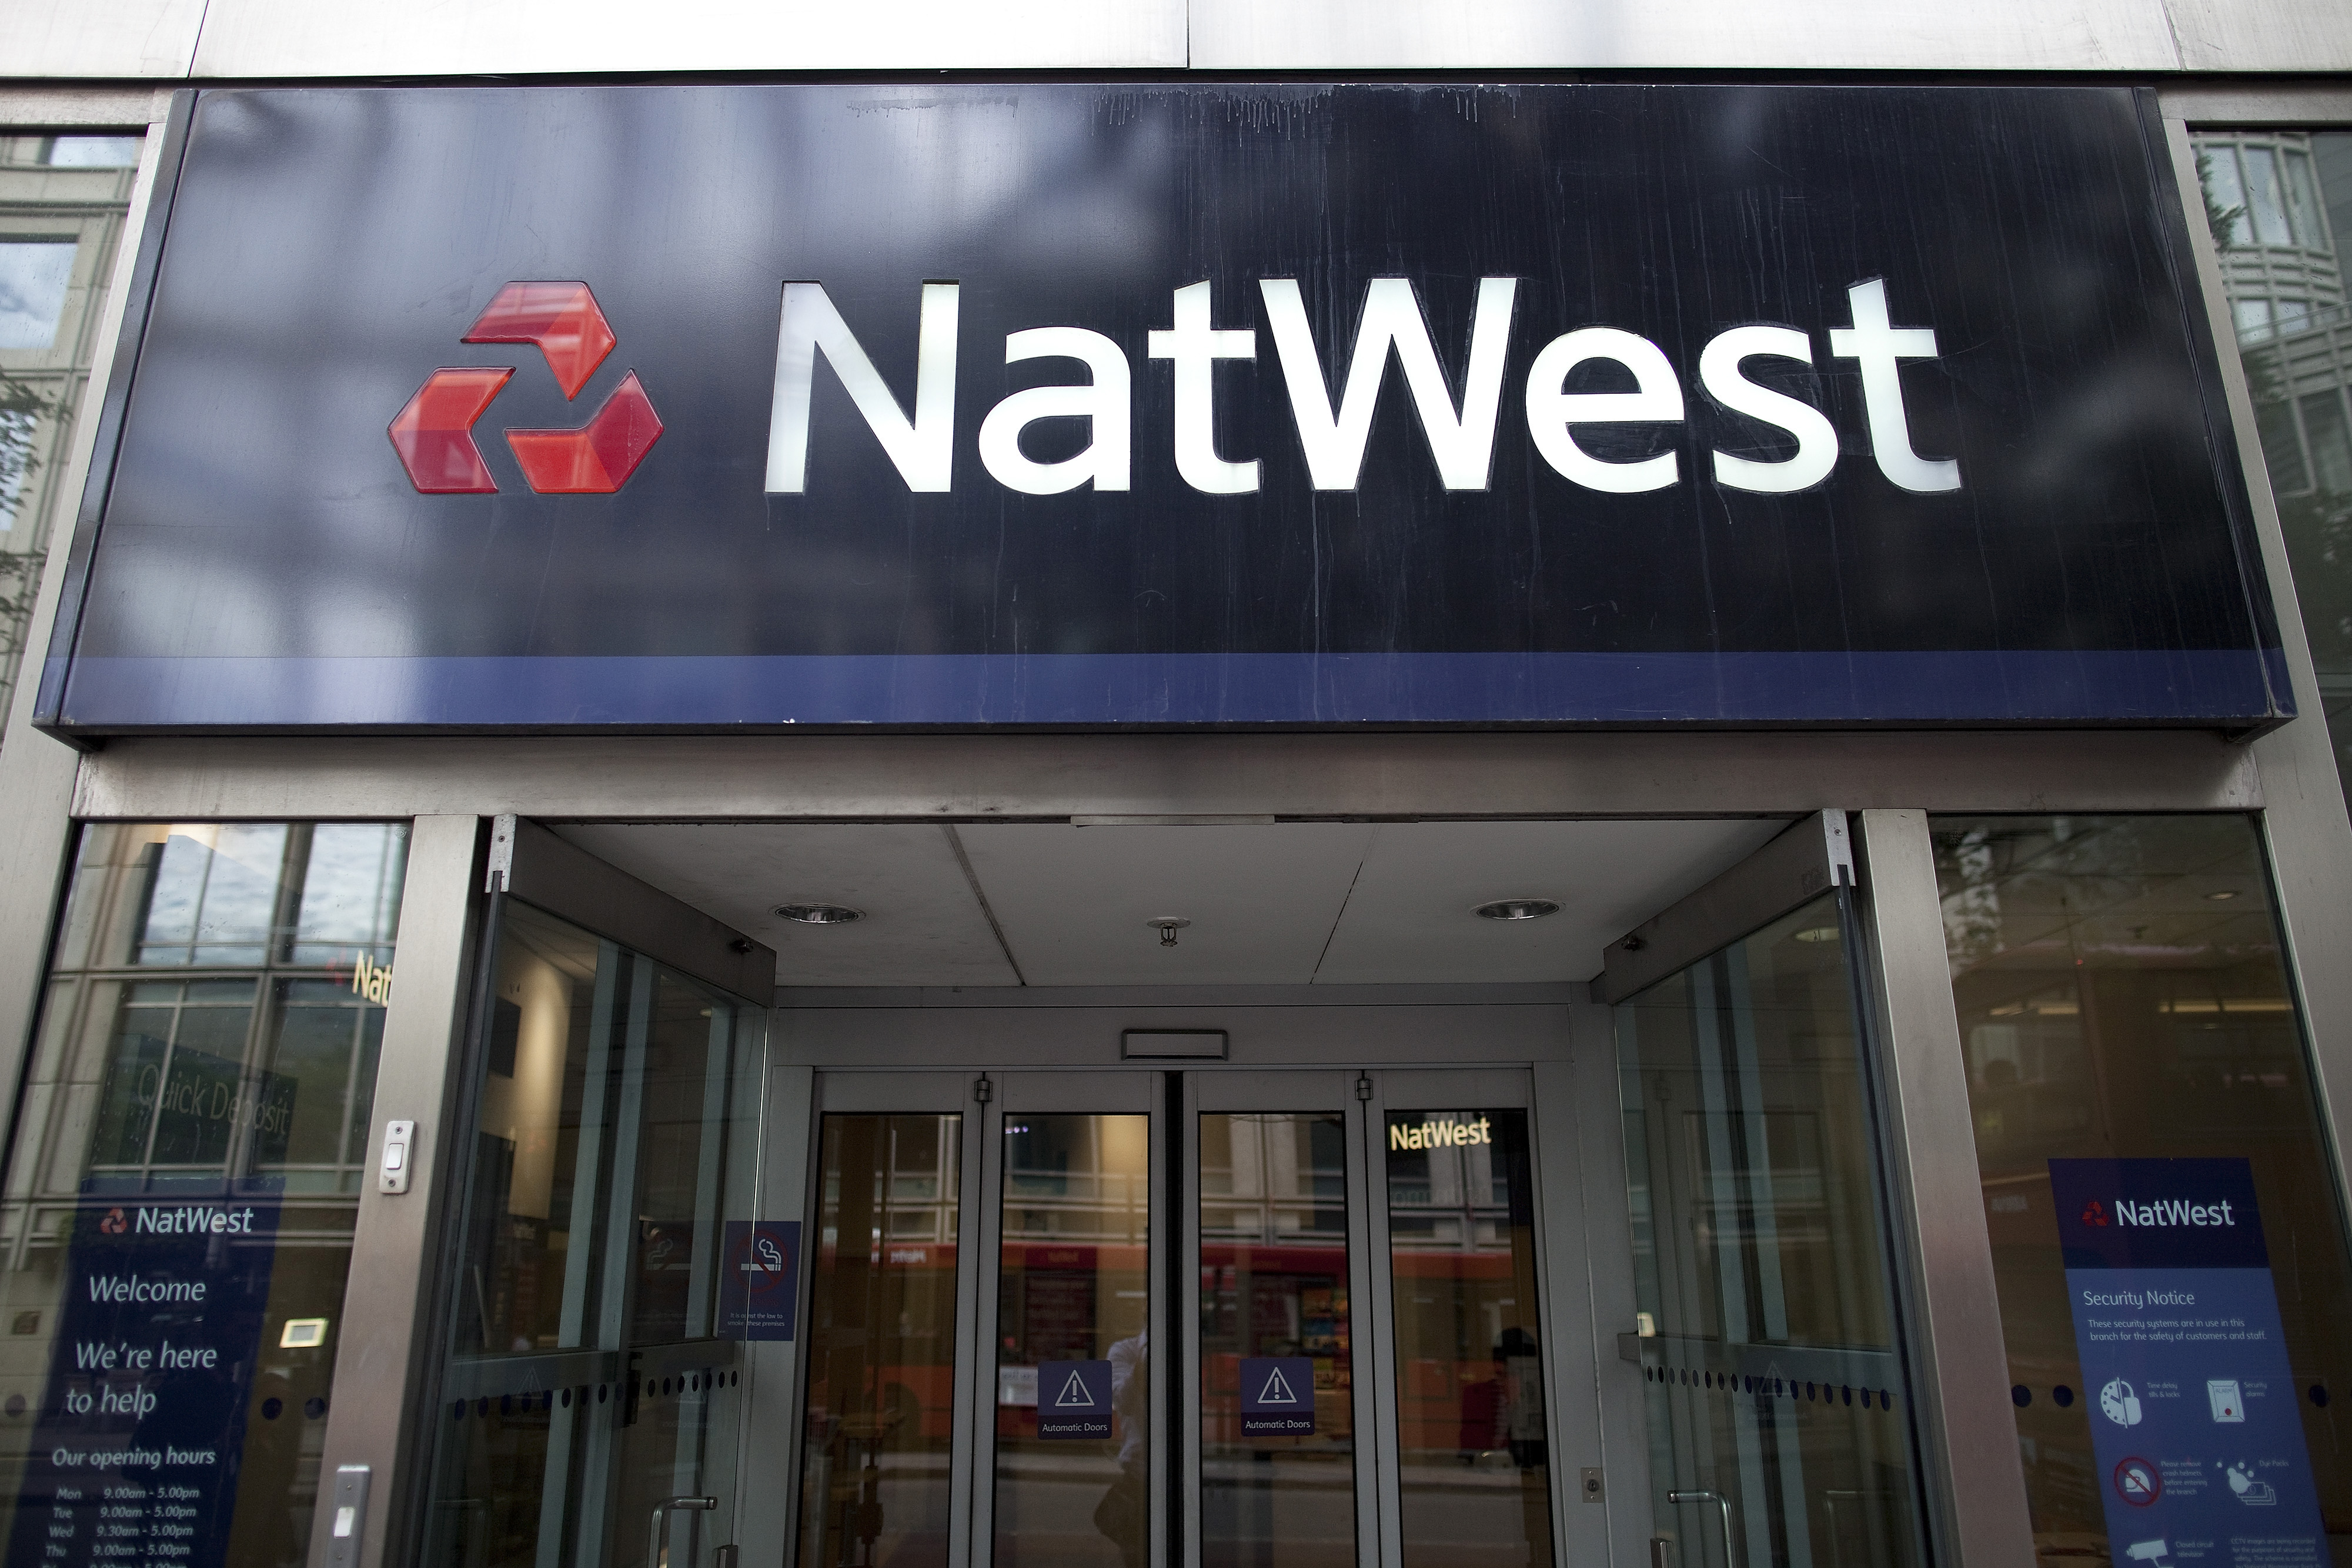 NatWest is offering £175 to switch to one of its current accounts